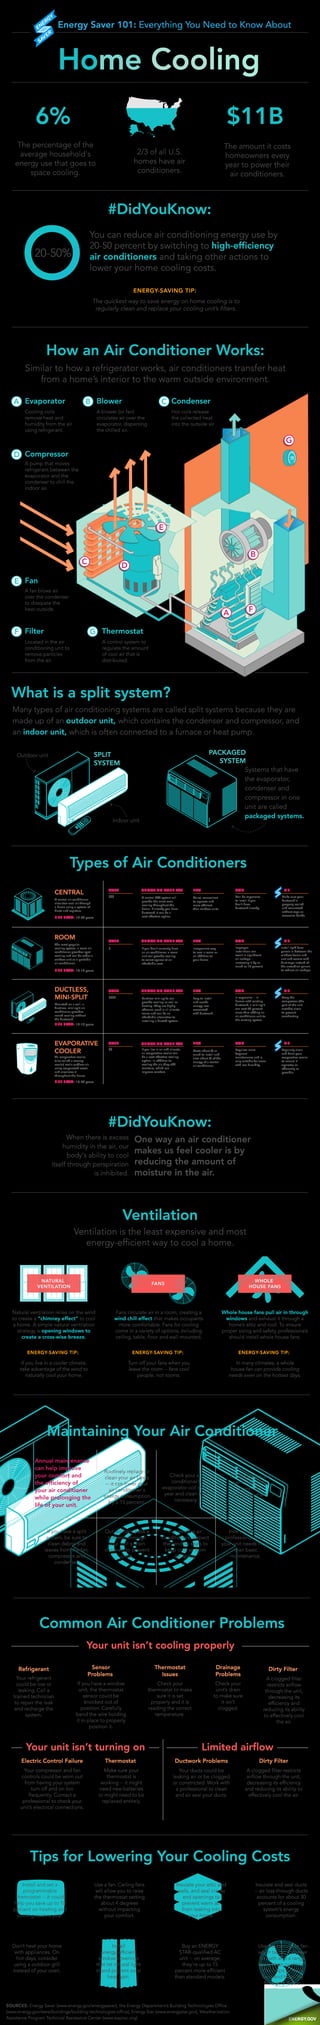 Energy Saver 101: Everything You Need to Know About 
6% $11B 
The percentage of the 
average household's 
energy use that goes to 
space cooling. 
2/3 of all U.S. 
homes have air 
conditioners. 
#DidYouKnow: 
The amount it costs 
homeowners every 
year to power their 
air conditioners. 
You can reduce air conditioning energy use by 
20-50 percent by switching to high-efficiency 
air conditioners and taking other actions to 
lower your home cooling costs. 
20-50% 
The quickest way to save energy on home cooling is to 
regularly clean and replace your cooling unit’s filters. 
How an Air Conditioner Works: 
Similar to how a refrigerator works, air conditioners transfer heat 
from a home’s interior to the warm outside environment. 
BB Blower 
A blower (or fan) 
circulates air over the 
evaporator, dispersing 
the chilled air. 
D 
C Condenser 
Hot coils release 
the collected heat 
into the outside air. 
G Thermostat 
Ventilation 
D Compressor 
A pump that moves 
refrigerant between the 
evaporator and the 
condenser to chill the 
indoor air. 
A FF 
CENTRAL 
A central air conditioner 
circulates cool air through 
a home using a system of 
ducts and registers. 
LIFE SPAN: 15-20 years 
ROOM 
The most popular 
cooling system, a room air 
conditioner provides spot 
cooling and can be either a 
window unit or a portable 
air conditioner. 
DUCTLESS, 
MINI-SPLIT 
Mounted on a wall, a 
ductless, mini-split air 
conditioner provides 
zoned cooling without 
the ductwork. 
EVAPORATIVE 
COOLER 
An evaporative cooler 
(also called a swamp 
cooler) cools outdoor air 
using evaporated water 
and circulates it 
throughout the house. 
Ventilation is the least expensive and most 
energy-efficient way to cool a home. 
A Evaporator 
Cooling coils 
remove heat and 
humidity from the air 
using refrigerant. 
NATURAL 
VENTILATION 
ENERGY-SAVING TIP: 
FANS 
ENERGY-SAVING TIP: 
WHOLE 
HOUSE FANS 
ENERGY-SAVING TIP: 
Maintaining Your Air Conditioner 
FF Filter 
Common Air Conditioner Problems 
EE Fan 
Refrigerant 
Your refrigerant 
could be low or 
leaking. Call a 
trained technician 
to repair the leak 
and recharge the 
system. 
Your unit isn’t cooling properly 
Sensor 
Problems 
If you have a window 
unit, the thermostat 
sensor could be 
knocked out of 
position. Carefully 
bend the wire holding 
it in place to properly 
position it. 
Your unit isn’t turning on Limited airflow 
Electric Control Failure 
Your compressor and fan 
controls could be worn out 
from having your system 
turn off and on too 
frequently. Contact a 
professional to check your 
unit’s electrical connections. 
Thermostat 
Make sure your 
thermostat is 
working -- it might 
need new batteries 
or might need to be 
replaced entirely. 
Thermostat 
Issues 
Check your 
thermostat to make 
sure it is set 
properly and it is 
reading the correct 
temperature. 
Drainage 
Problems A clogged filter 
Check your 
unit’s drain 
to make sure 
it isn’t 
clogged. 
Ductwork Problems 
Your ducts could be 
leaking air or be clogged 
or constricted. Work with 
a professional to clean 
and air seal your ducts. 
Dirty Filter 
restricts airflow 
through the unit, 
decreasing its 
efficiency and 
reducing its ability 
to effectively cool 
the air. 
Dirty Filter 
A clogged filter restricts 
airflow through the unit, 
decreasing its efficiency 
and reducing its ability to 
effectively cool the air. 
Tips for Lowering Your Cooling Costs 
Install and set a 
programmable 
thermostat -- it could 
help you save up to 10 
percent on heating and 
cooling costs a year. 
Use a fan. Ceiling fans 
will allow you to raise 
the thermostat setting 
about 4 degrees 
without impacting 
your comfort. 
Insulate your attic and 
walls, and seal cracks 
and openings to 
prevent warm air 
from leaking into 
your home. 
Insulate and seal ducts 
-- air loss through ducts 
accounts for about 30 
percent of a cooling 
system’s energy 
consumption. 
Don’t heat your home 
with appliances. On 
hot days, consider 
using a outdoor grill 
instead of your oven. 
Install 
energy-efficient 
window coverings 
that let natural light 
in and prevent solar 
heat gain. 
Buy an ENERGY 
STAR-qualified AC 
unit -- on average, 
they're up to 15 
percent more efficient 
than standard models. 
Use the bathroom fan 
when taking a shower 
or bath and a range 
hood when cooking -- 
this helps remove 
heat and humidity 
from your home. 
SOURCES: Energy Saver (www.energy.gov/energysaver), the Energy Department’s Building Technologies Office 
(www.energy.gov/eere/buildings/building-technologies-office), Energy Star (www.energystar.gov), Weatherization 
Assistance Program Technical Assistance Center (www.waptac.org) 
BB 
C 
A fan blows air 
over the condenser 
to dissipate the 
heat outside. 
Located in the air 
conditioning unit to 
remove particles 
from the air. 
A control system to 
regulate the amount 
of cool air that is 
distributed. 
G 
What is a split system? 
Many types of air conditioning systems are called split systems because they are 
made up of an outdoor unit, which contains the condenser and compressor, and 
an indoor unit, which is often connected to a furnace or heat pump. 
Systems that have 
the evaporator, 
condenser and 
compressor in one 
unit are called 
packaged systems. 
SPLIT 
SYSTEM 
PACKAGED 
SYSTEM 
Indoor unit 
Outdoor unit 
Natural ventilation relies on the wind 
to create a “chimney effect” to cool 
a home. A simple natural ventilation 
strategy is opening windows to 
create a cross-wise breeze. 
If you live in a cooler climate, 
take advantage of the wind to 
naturally cool your home. 
Fans circulate air in a room, creating a 
wind chill effect that makes occupants 
more comfortable. Fans for cooling 
come in a variety of options, including 
ceiling, table, floor and wall-mounted. 
Turn off your fans when you 
leave the room -- fans cool 
people, not rooms. 
Whole house fans pull air in through 
windows and exhaust it through a 
home’s attic and roof. To ensure 
proper sizing and safety, professionals 
should install whole house fans. 
In many climates, a whole 
house fan can provide cooling 
needs even on the hottest days. 
ENERGY-SAVING TIP: 
EE 
Types of Air Conditioners 
CON 
Can be expensive 
to install if you 
don’t have 
ductwork already. 
COST CHOOSING YOUR A/C 
CHOOSING YOUR A/C 
CHOOSING YOUR A/C 
CHOOSING YOUR A/C 
COST 
COST 
COST 
TIP 
Make sure your 
ductwork is 
properly sealed 
and connected 
without sags or 
excessive bends. 
PRO 
Quiet, convenient 
to operate and 
more efficient 
than window units. 
CON 
Improper 
installation can 
result in significant 
air leakage -- 
increasing it by as 
much as 10 percent. 
TIP 
Install rigid form 
panels in between the 
window frame and 
unit and secure with 
duct tape instead of 
the accordion panels 
to reduce air leakage. 
PRO 
Inexpensive way 
to cool a room or 
an addition to 
your home. 
CON 
Is expensive -- in 
homes with existing 
ductwork, a mini-split 
can cost 30 percent 
more than adding an 
air conditioner unit to 
the existing system. 
TIP 
Keep the 
compressor (the 
part of the unit 
outside) clean 
to prevent 
overheating. 
PRO 
Easy to install 
and avoids 
energy loss 
associated 
with ductwork. 
CON 
Requires more 
frequent 
maintenance and is 
only suitable for areas 
with low humidity. 
TIP 
Regularly clean 
and drain your 
evaporative cooler 
to ensure it 
operates as 
efficiently as 
possible. 
PRO 
Costs about ½ as 
much to install and 
uses about ¼ of the 
energy of a central 
air conditioner. 
LIFE SPAN: 10-15 years 
LIFE SPAN: 12-15 years 
LIFE SPAN: 15-20 years 
A central A/C system will 
provide the most even 
cooling throughout the 
home. If already you have 
ductwork, it can be a 
cost-effective option. 
If you don't currently have 
an air conditioner, a room 
unit can provide cooling 
to select spaces at an 
affordable cost. 
$$$ 
$ 
Ductless mini-splits can 
provide cooling as well as 
heating. They are highly 
efficient, work in all climate 
zones and can be an 
affordable alternative to 
installing a ducted system. 
If you live in an arid climate, 
an evaporative cooler can 
be a cost-effective cooling 
option. In addition to 
cooling the air, they add 
moisture, which can 
improve comfort. 
$$$$ 
$$ 
Annual maintenance 
can help improve 
your comfort and 
the efficiency of 
your air conditioner 
while prolonging the 
life of your unit. 
Routinely replace or 
clean your air filters 
-- it can lower your 
air conditioner's 
energy consumption 
by 5-15 percent. 
Check your air 
conditioner’s 
evaporator coil every 
year and clean it as 
necessary. 
If your coil fins are 
bent, use a “fin 
comb” to 
straighten them. 
If you have a split 
system, be sure to 
clean debris and 
leaves from the fan, 
compressor and 
condenser. 
Occasionally pass a 
stiff wire through 
your unit's drain 
channels to prevent 
clogs. 
For window air 
conditioners, inspect 
the window seals to 
keep cool air from 
escaping. 
Hire a certified 
professional when 
your unit needs more 
than basic 
maintenance. 
#DidYouKnow: 
When there is excess 
humidity in the air, our 
body's ability to cool 
itself through perspiration 
is inhibited. 
One way an air conditioner 
makes us feel cooler is by 
reducing the amount of 
moisture in the air. 
 